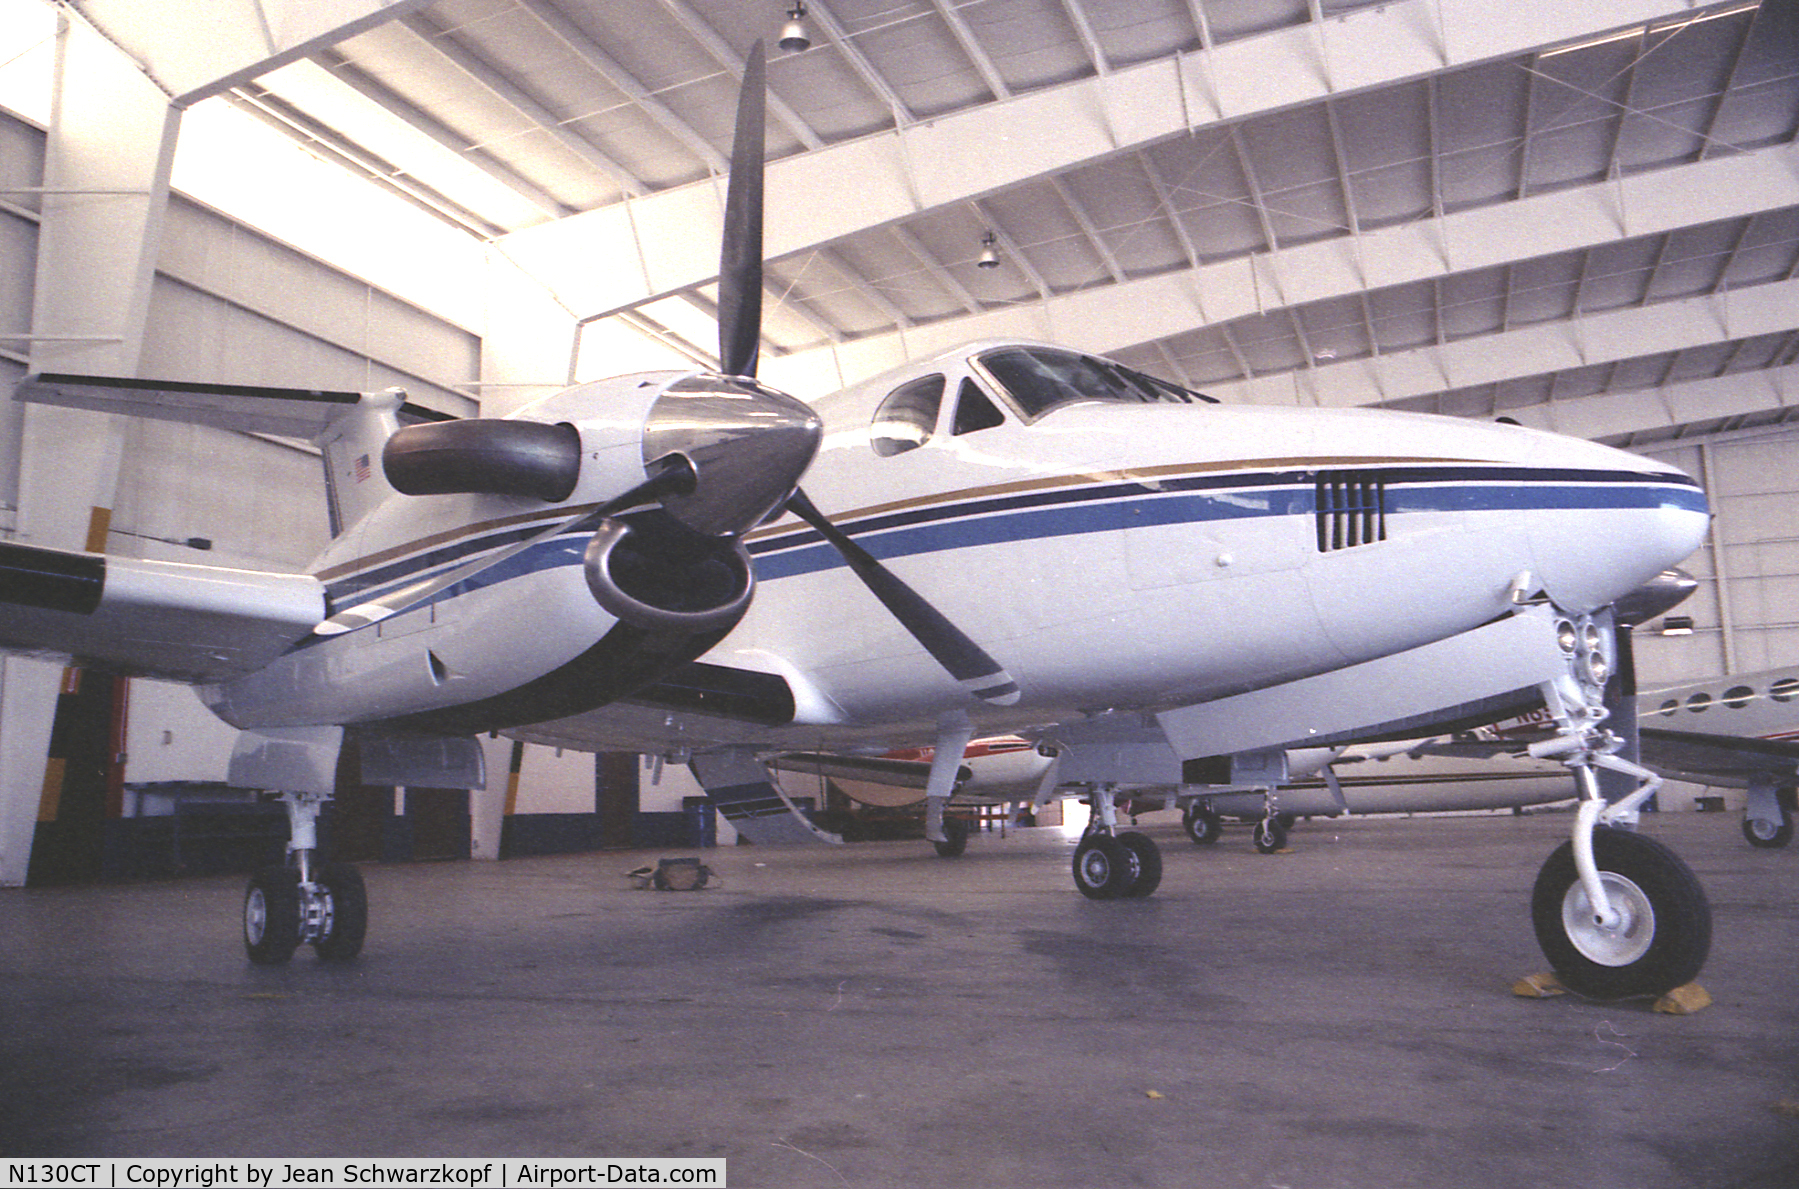 N130CT, 1980 Beech 200 Super King Air C/N BB-578, Flew this King Air ( BB-578 ) back in the early 80s.